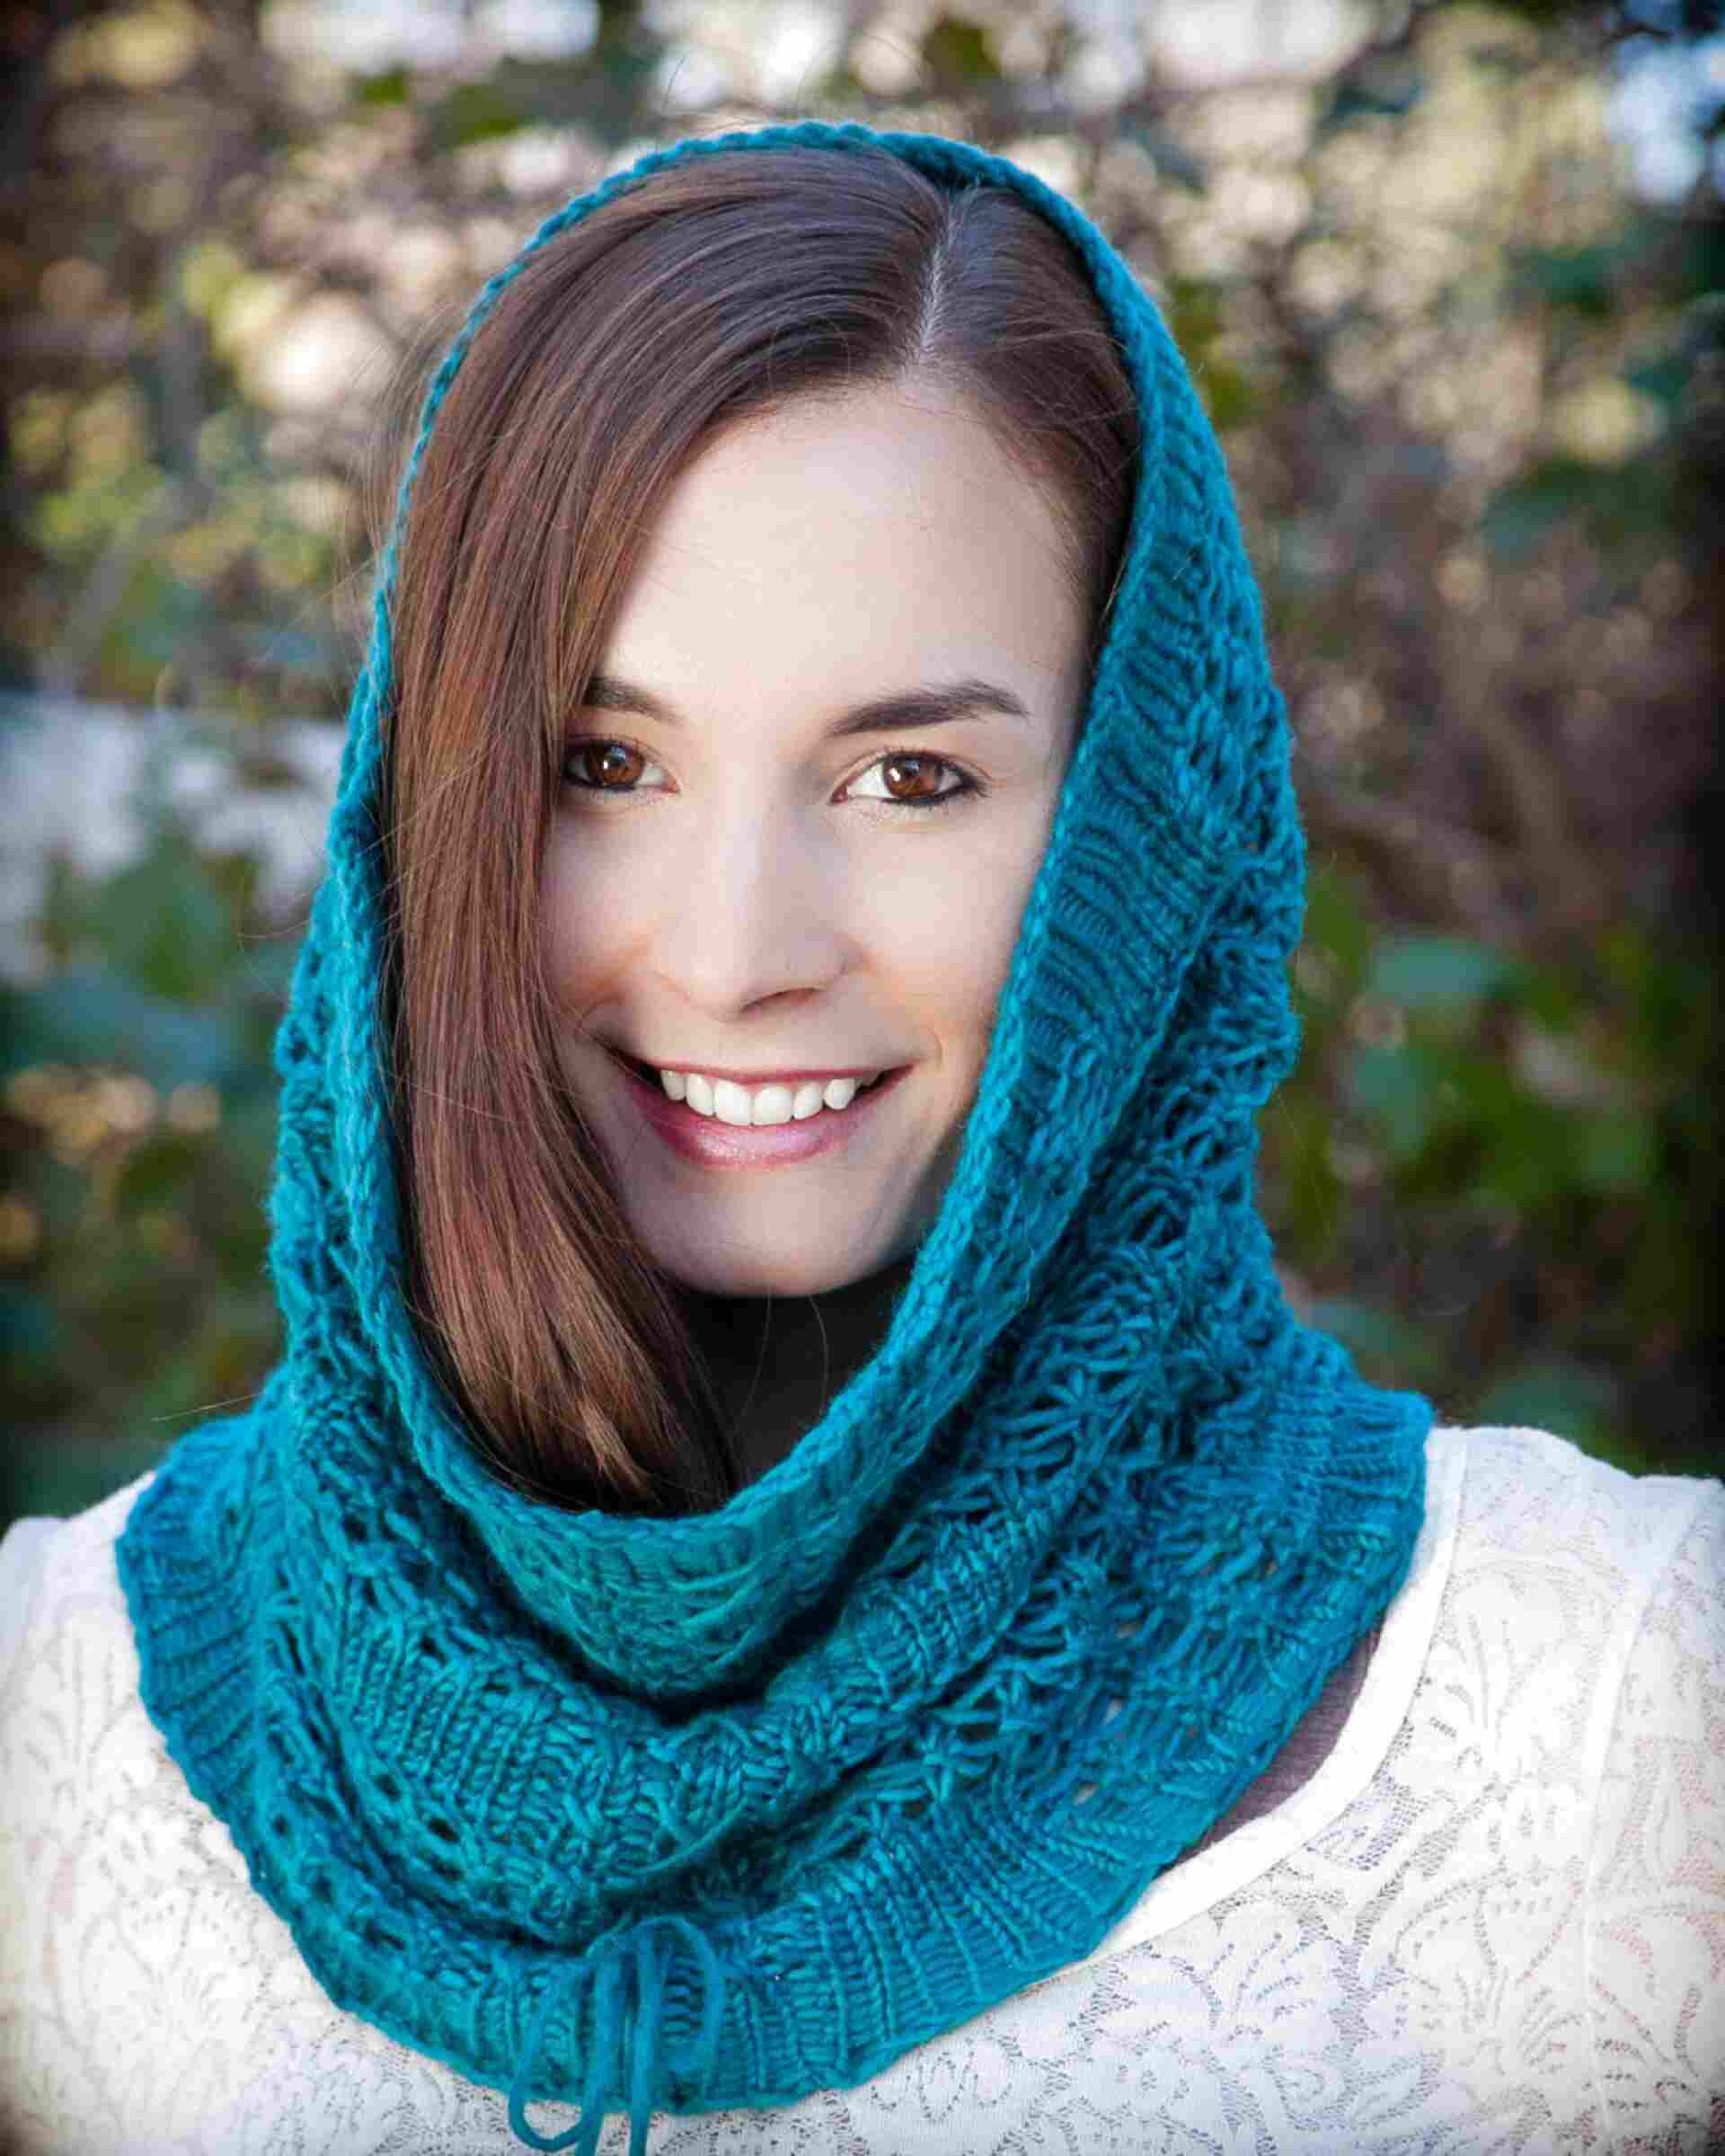 Snood Knitting Patterns for sale in UK View 15 bargains